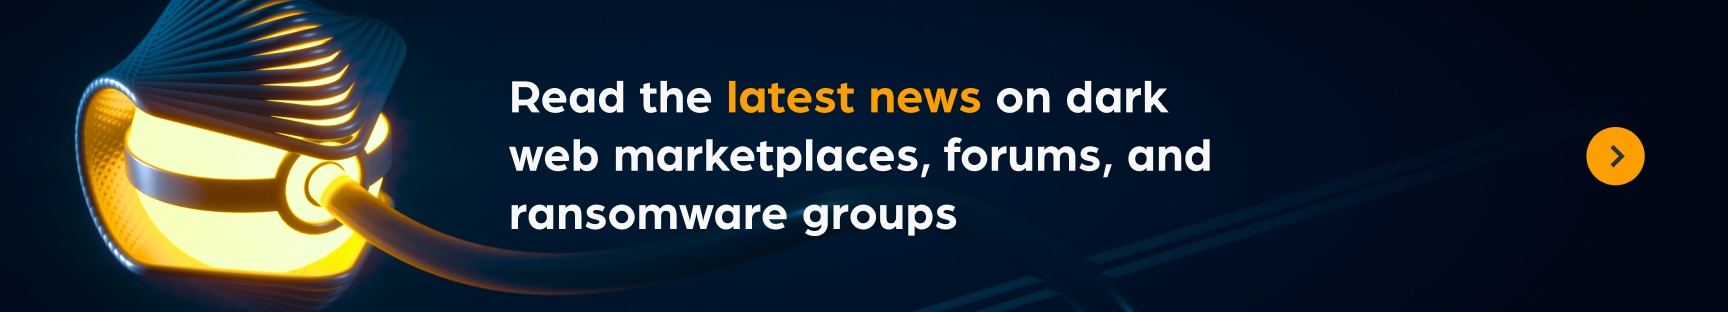 Read the latest news on dark web marketplaces, forums, and ransomware groups